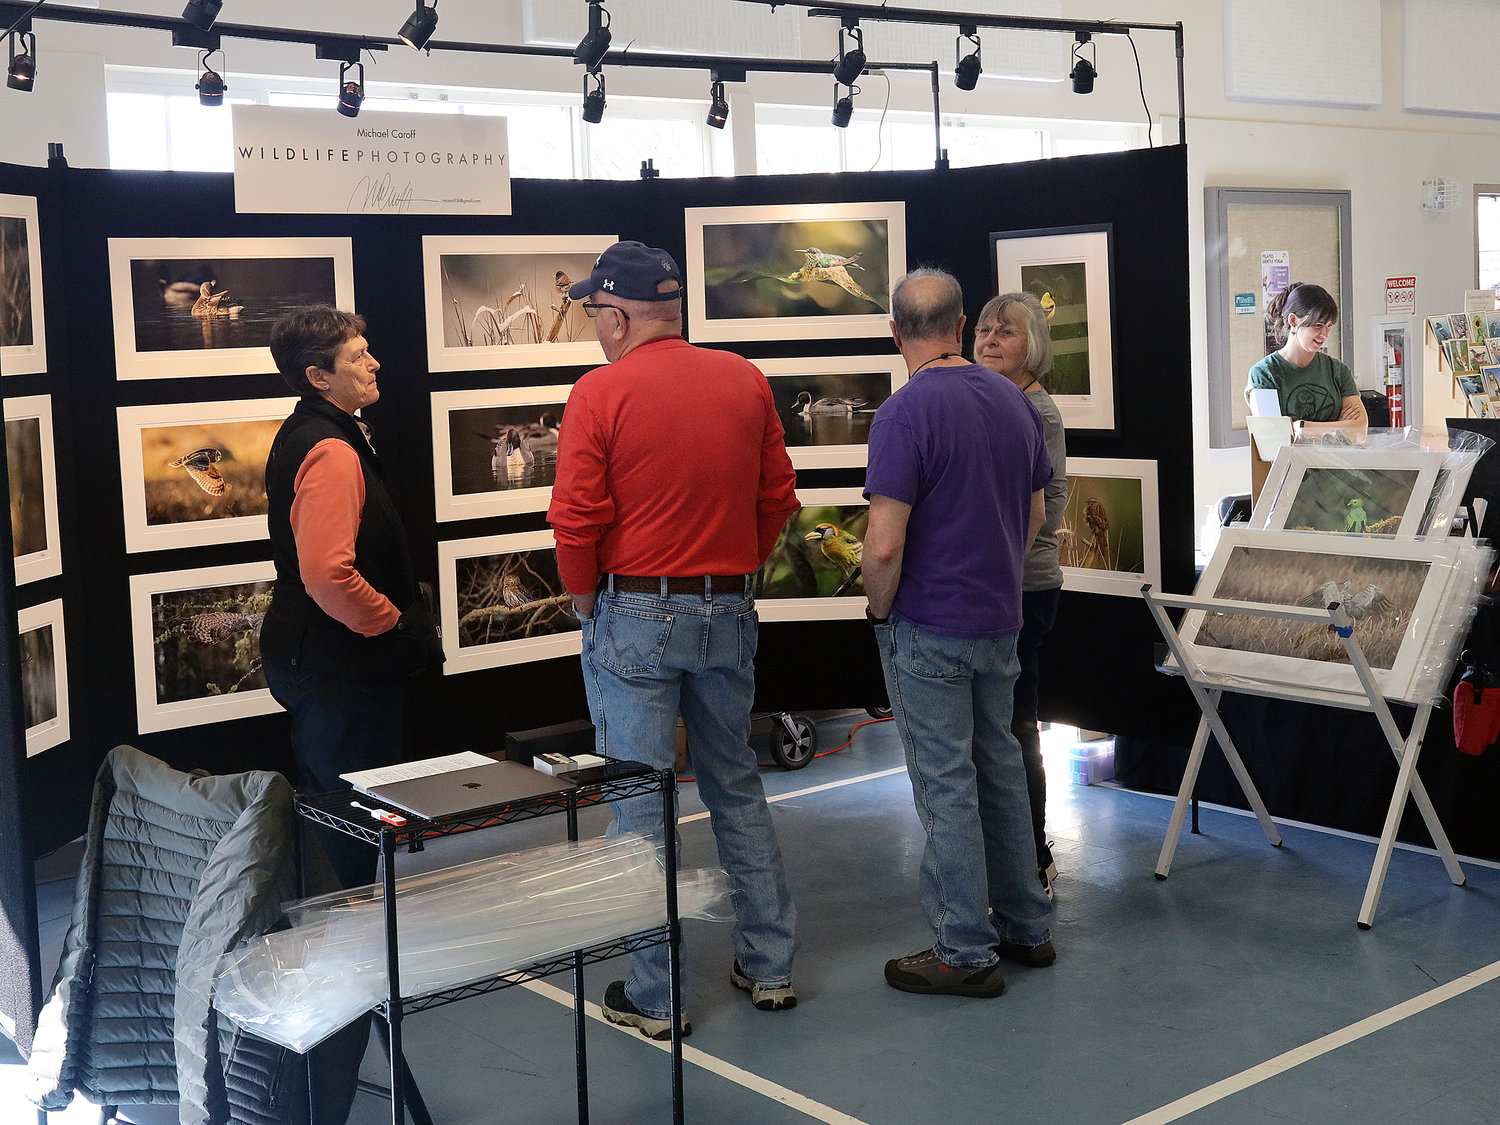 A vendor displays their wildlife photography at the expo.